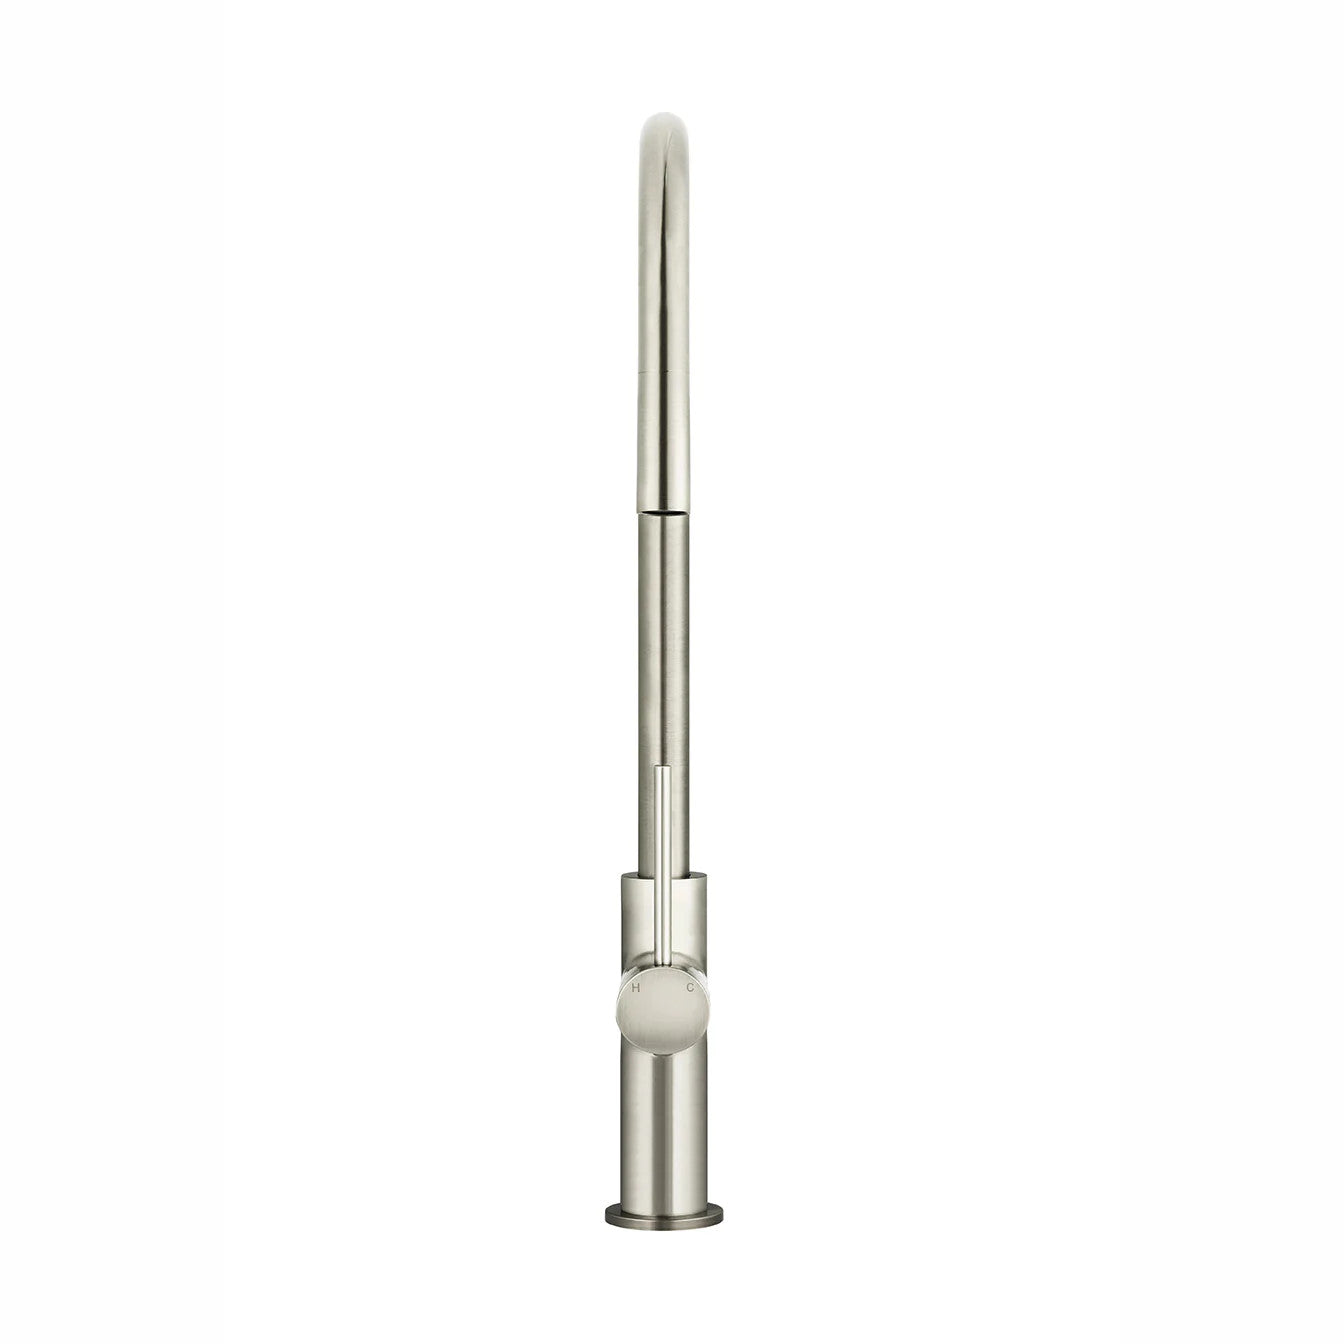 Piccola Out Kitchen Mixer Tap - PVD Brushed Nickel